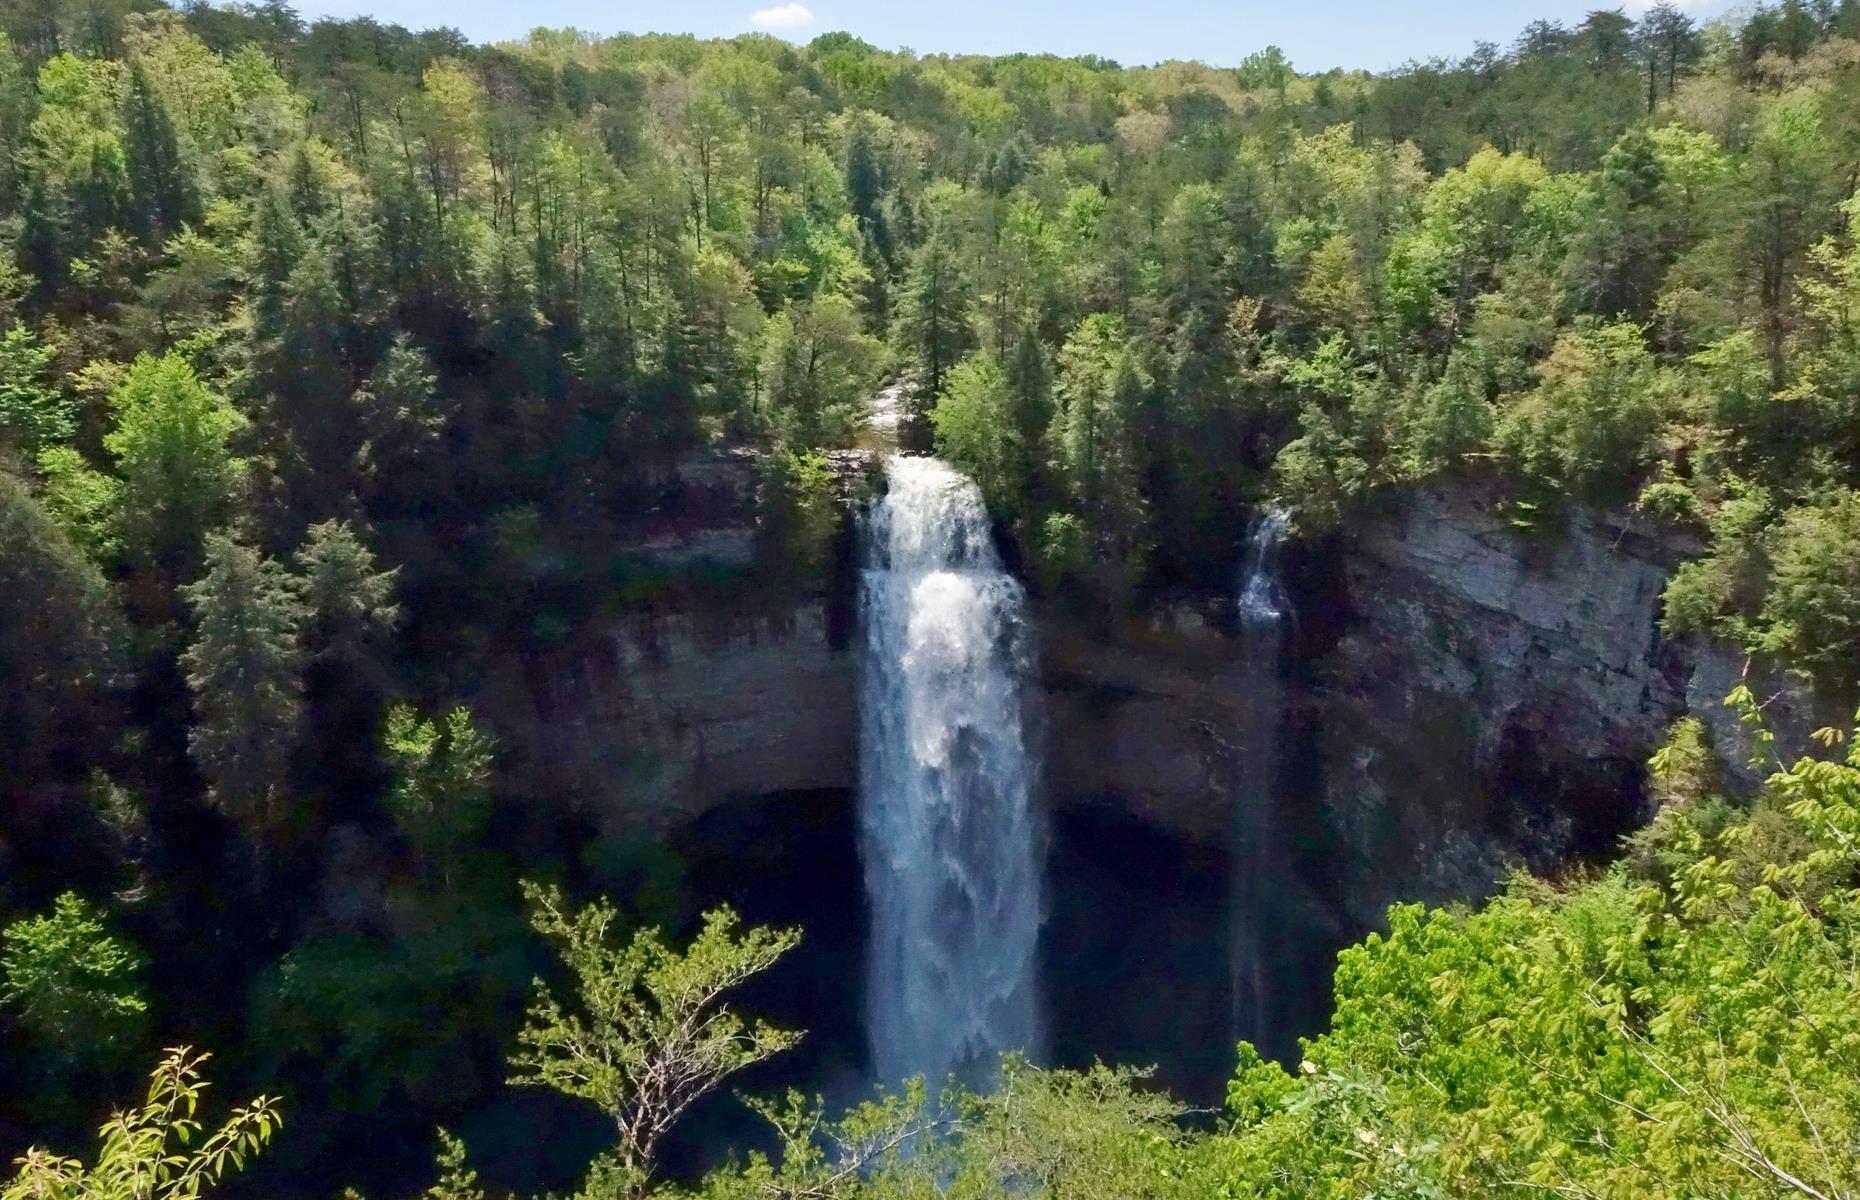 <p>This dramatic waterfall in the US could just as easily be in New Zealand – the cascade bears a striking resemblance to the country's famed Humboldt Falls. But these thundering waters have their home in eastern Tennessee in the eponymous Fall Creek Falls State Park. One of the greatest natural wonders in the country's east, the falls rush over tree-topped rock, crashing 256 feet (80m) into the lake below. There are more than 200 campsites here too, so you've no need to rush your adventures. <a href="https://www.loveexploring.com/galleries/76836/amazing-pictures-of-the-worlds-most-impressive-waterfalls?page=1">Amazing images of the world's most stunning waterfalls</a>.</p>